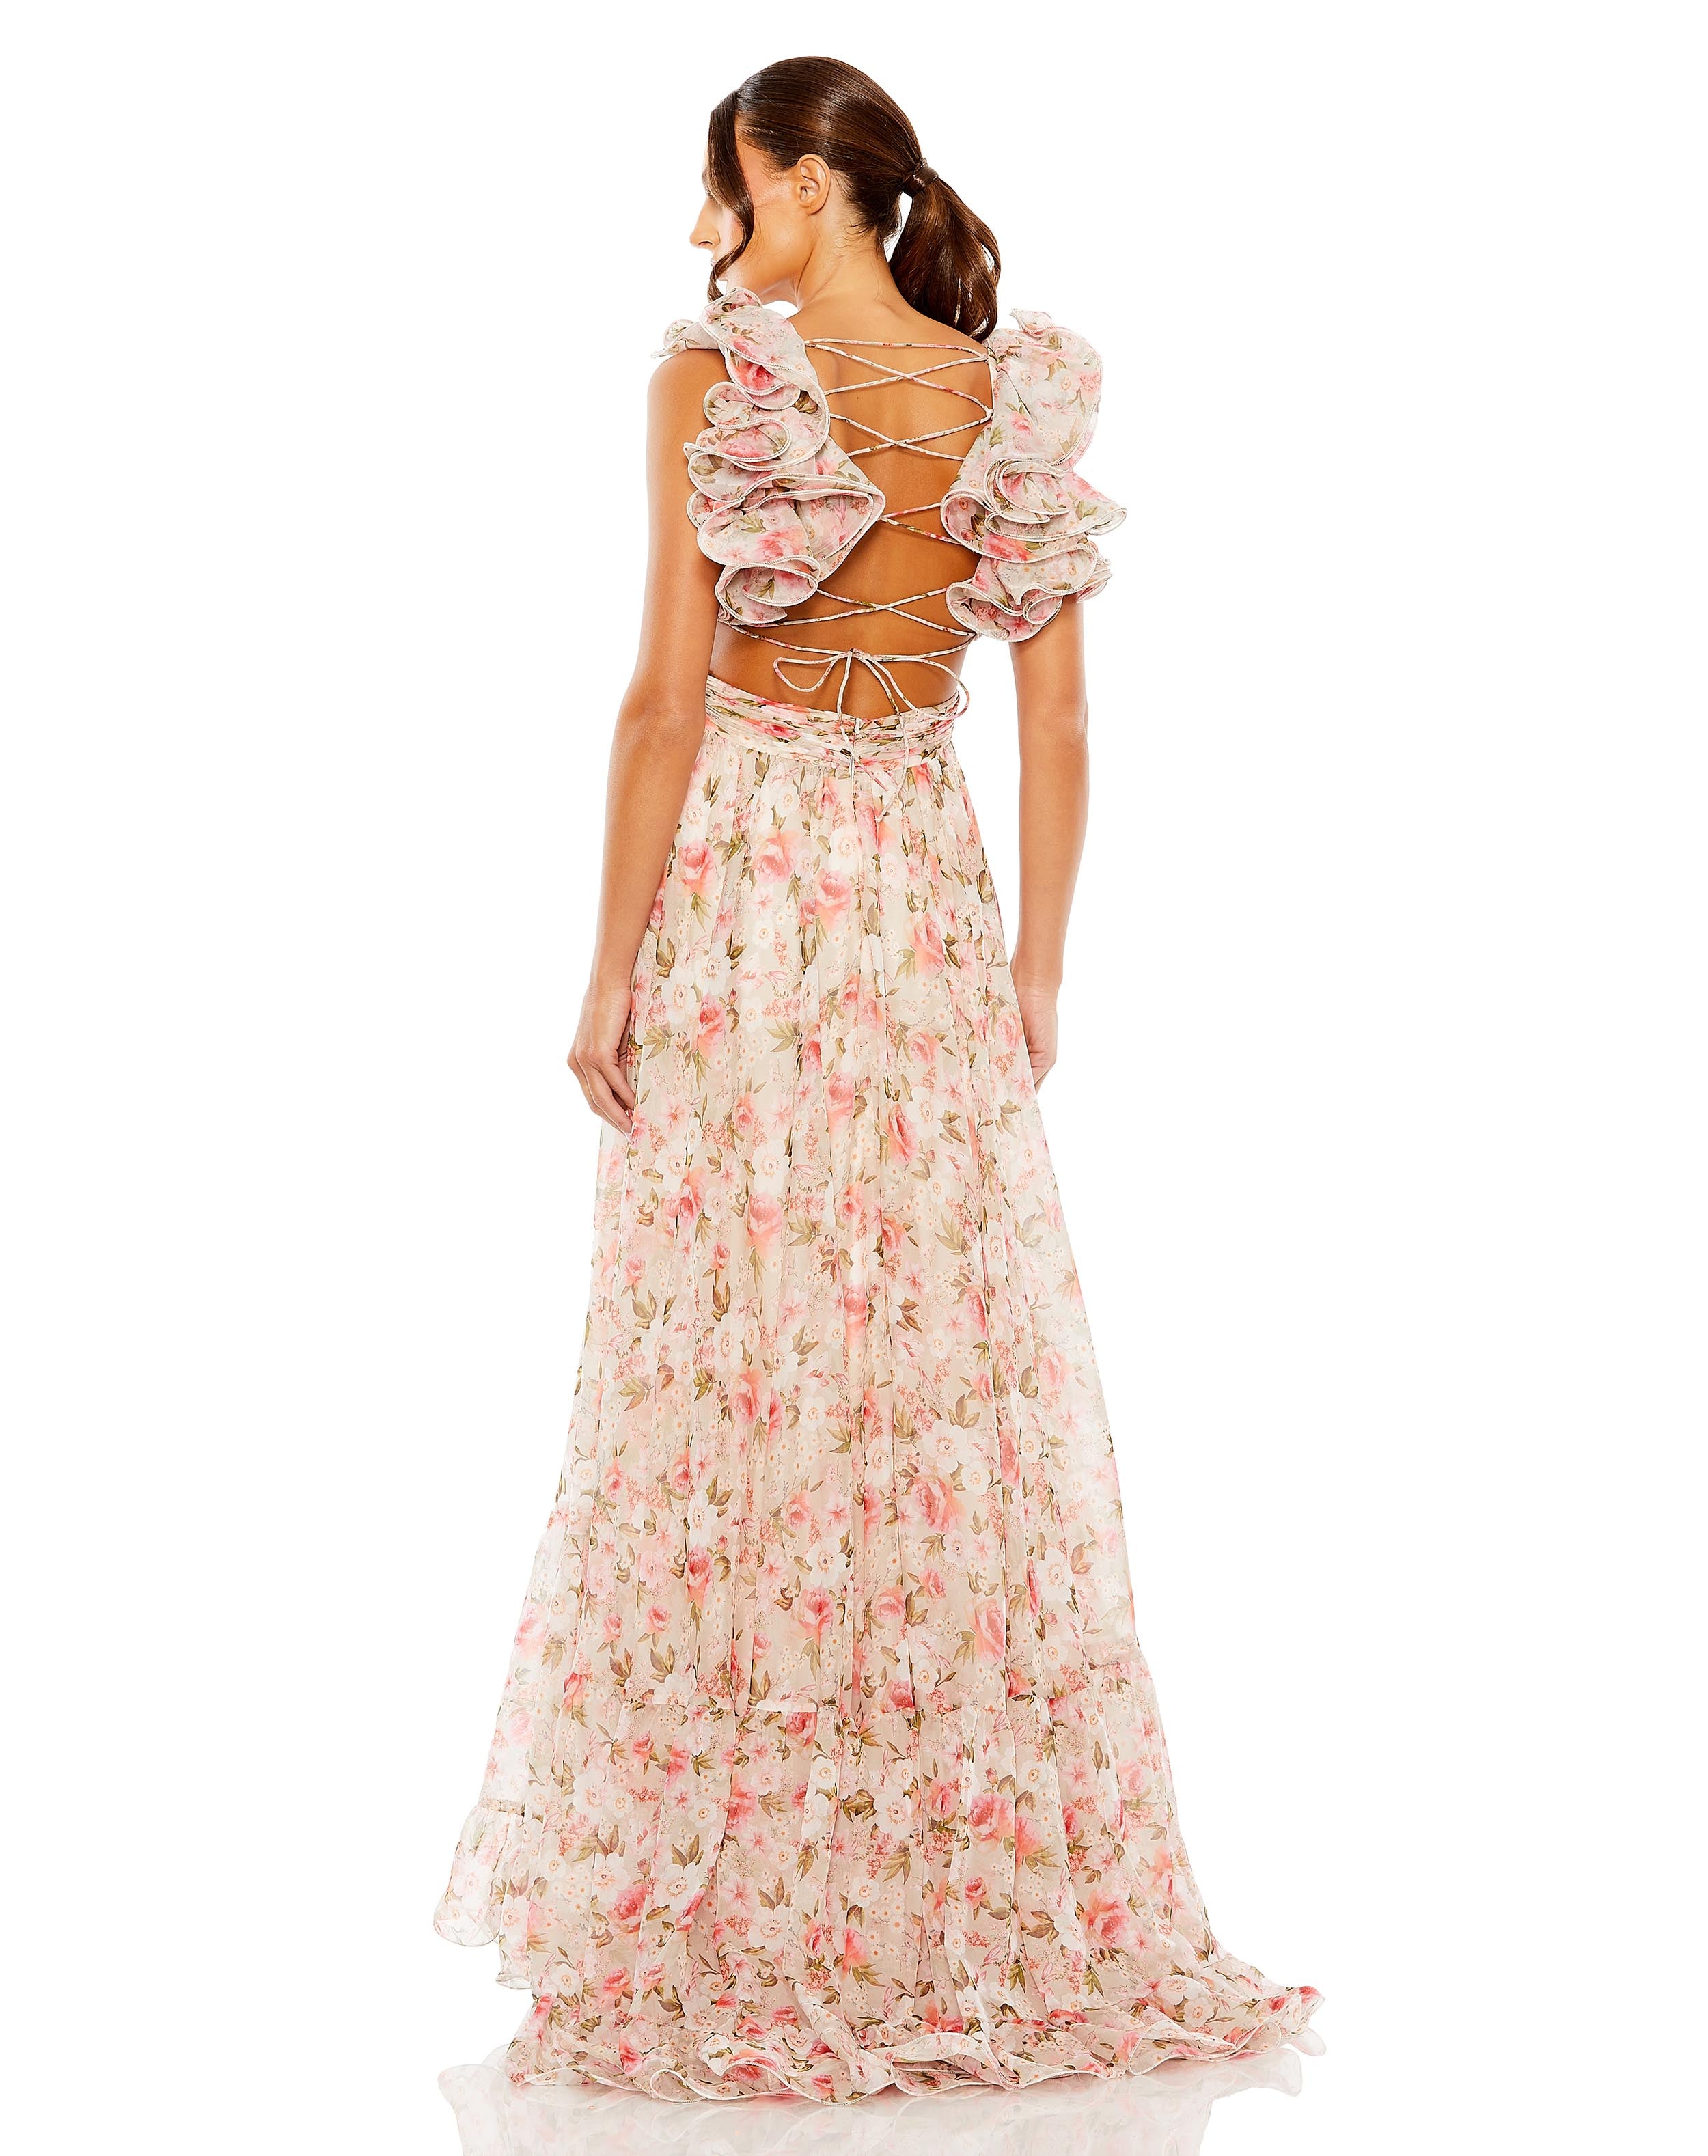 Ruffle Tiered Cut-Out Chiffon Floral Gown